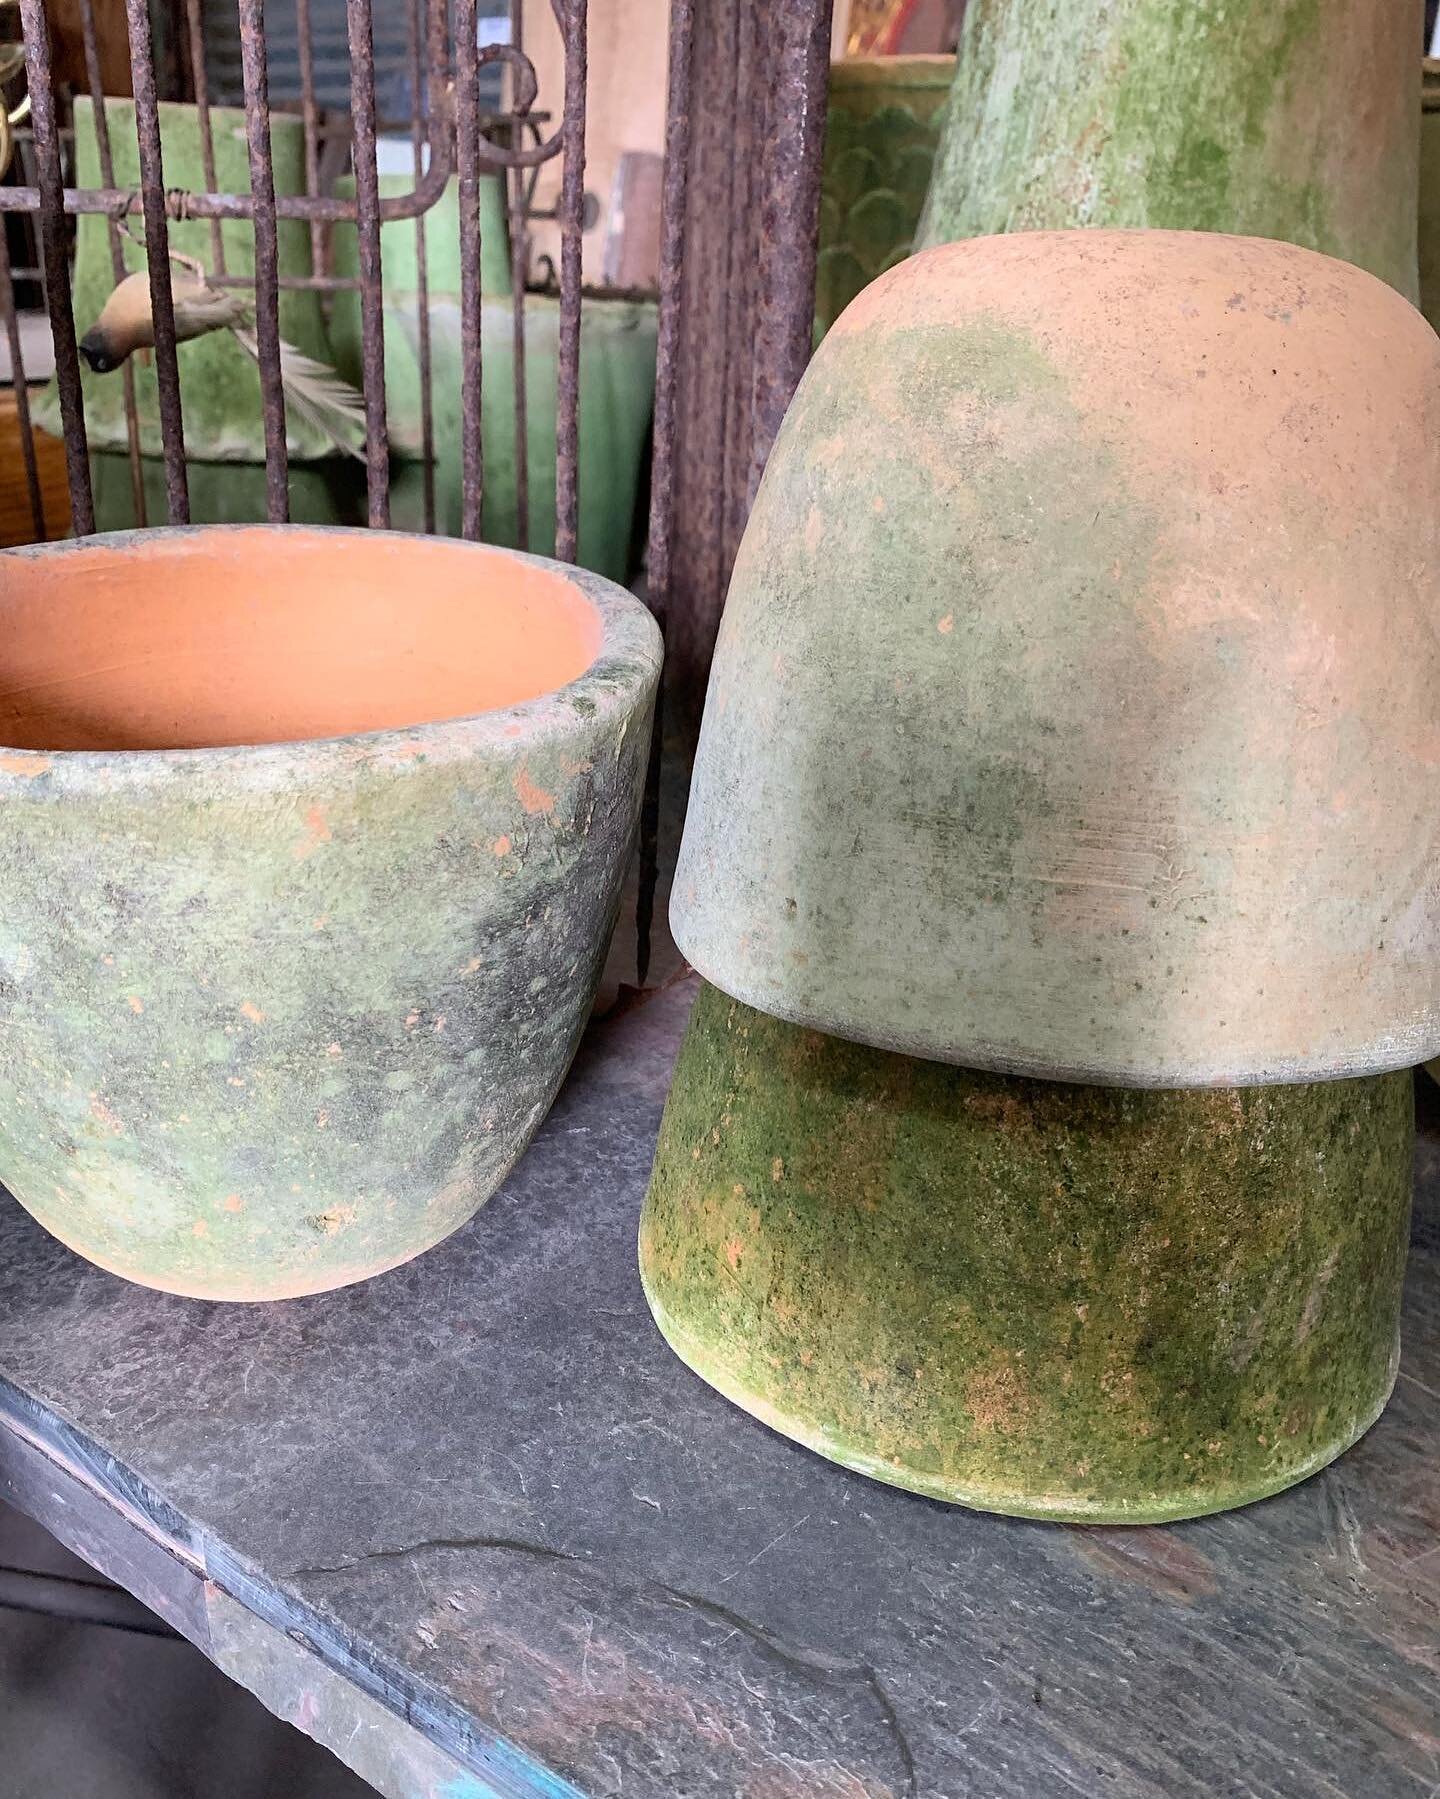 We&rsquo;ve got lots of cool planters and pots - come check them out tomorrow -  We are open Sat 9-5 #planters #garden #design #interiors #shoptampa